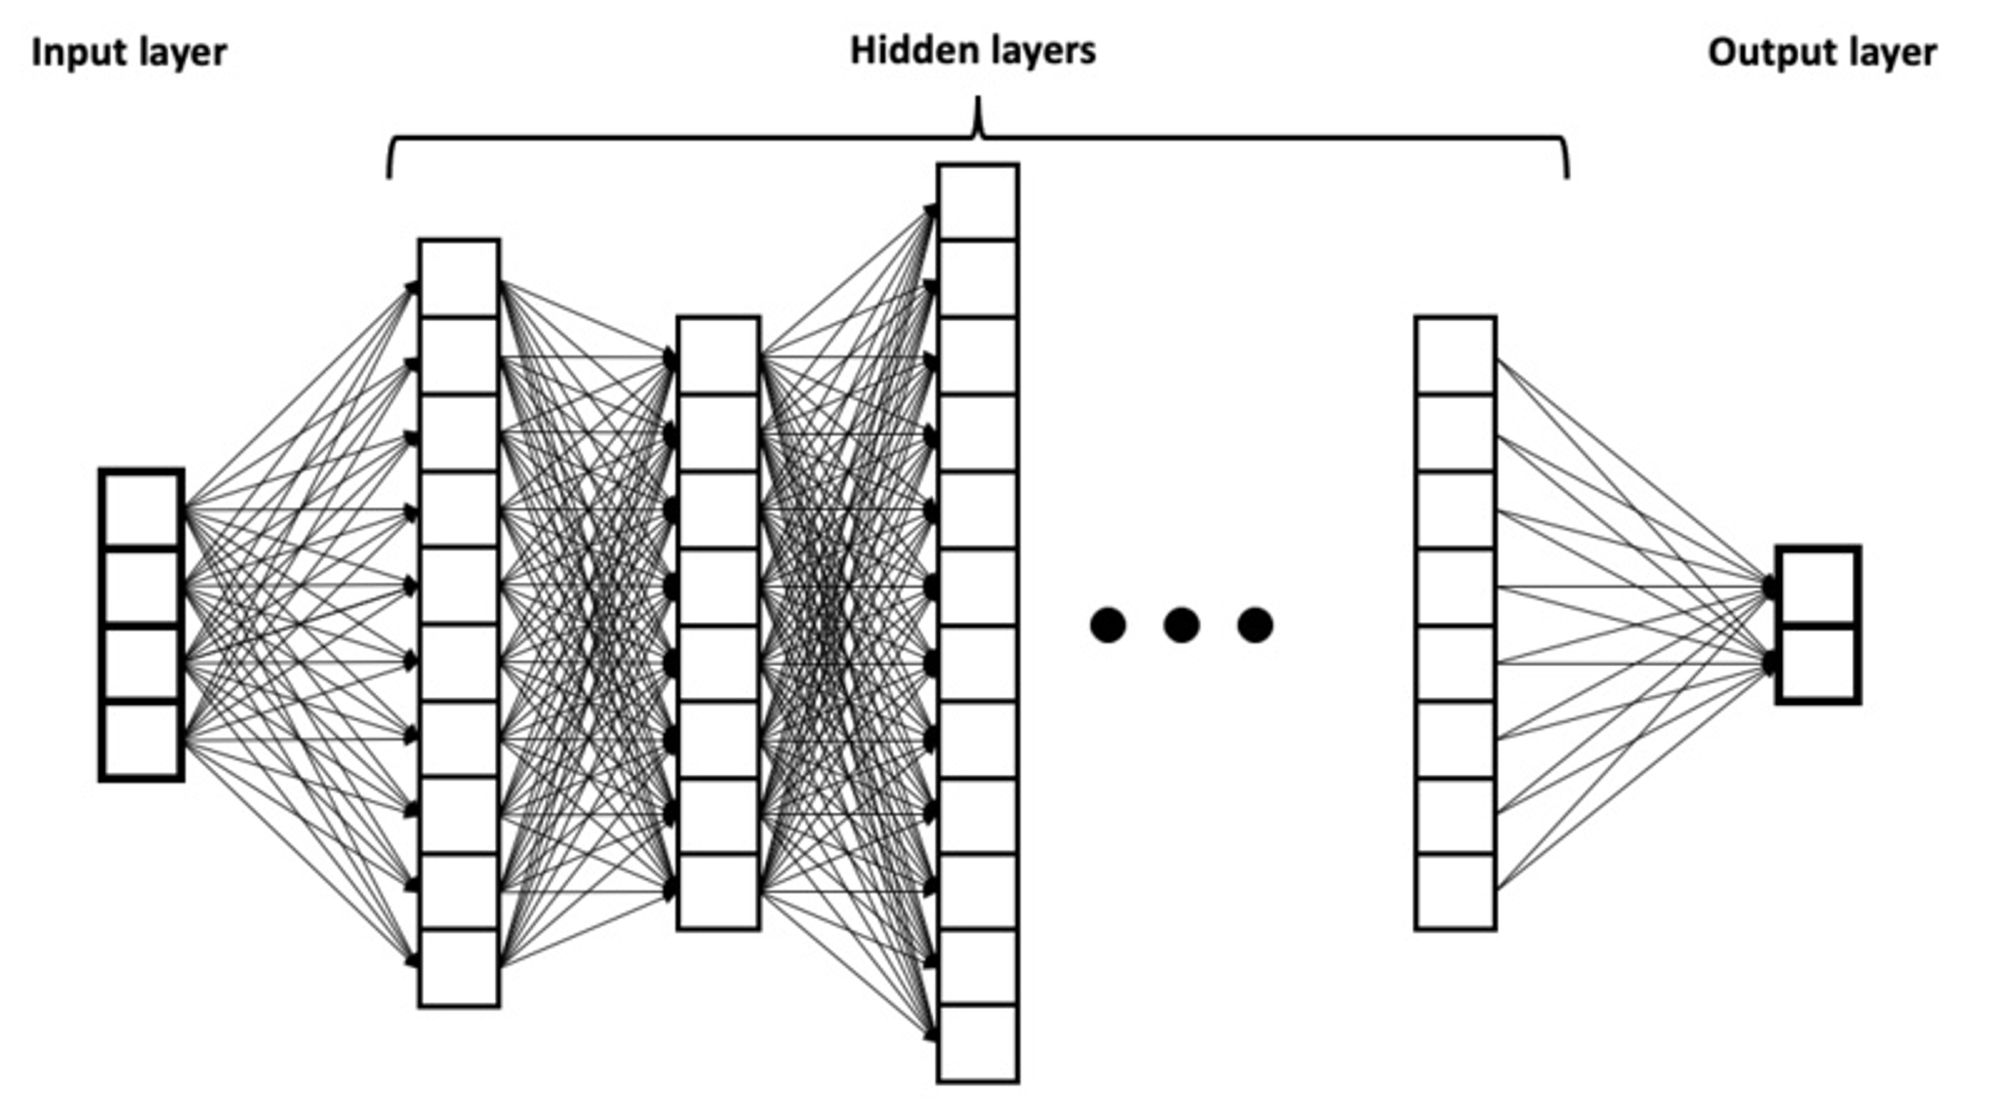 A diagram showing the layers of a deep neural network